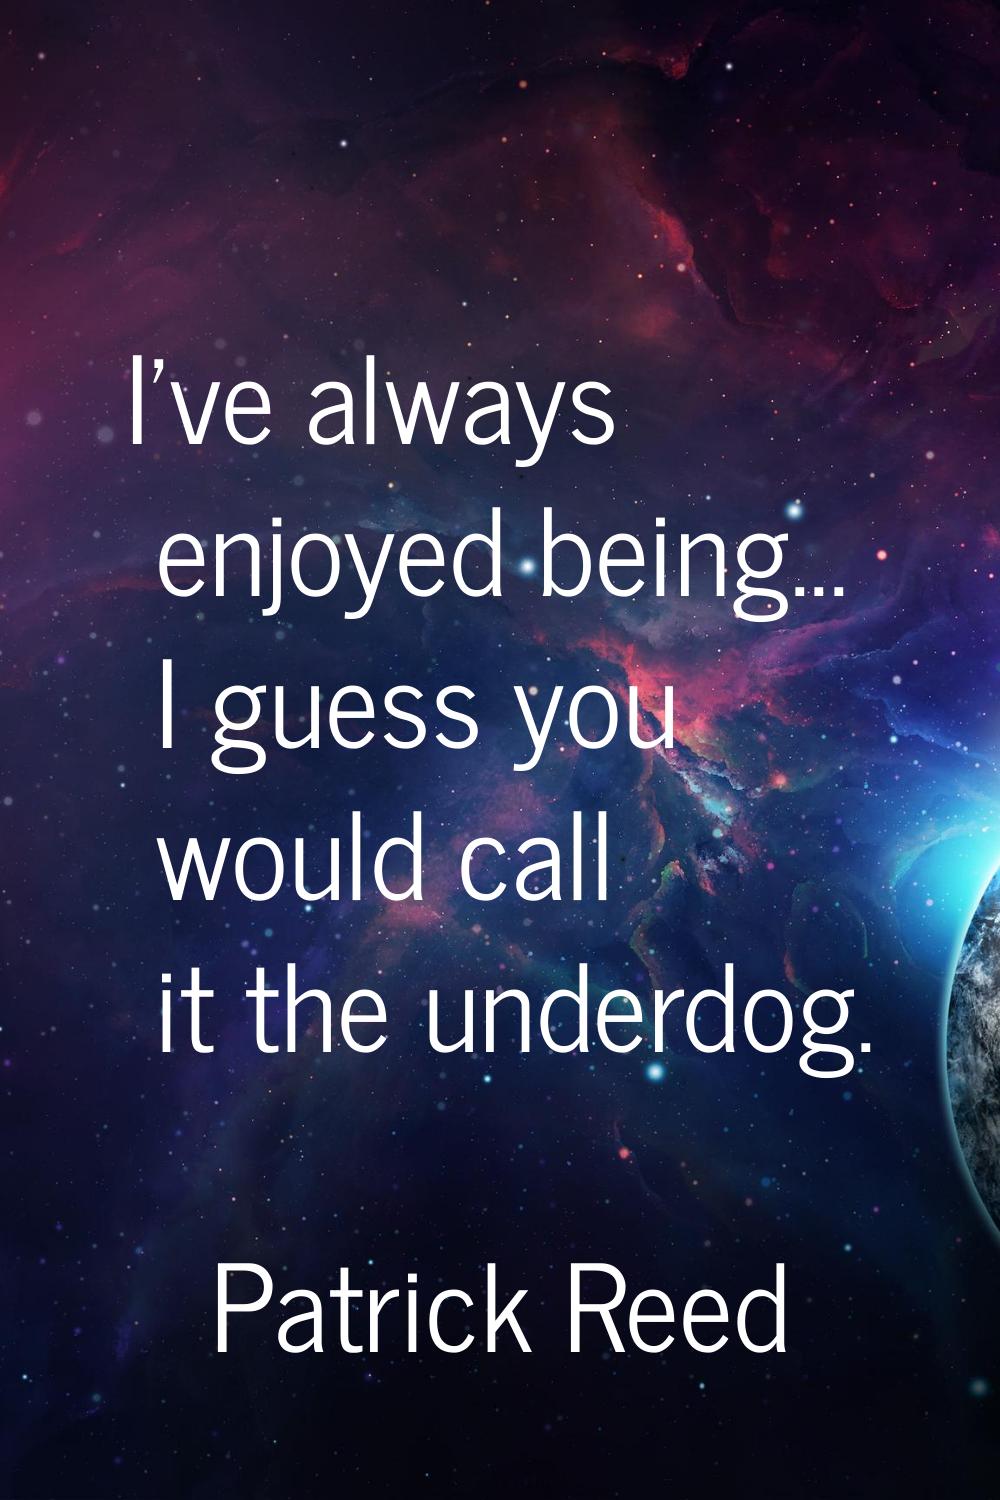 I’ve always enjoyed being... I guess you would call it the underdog.